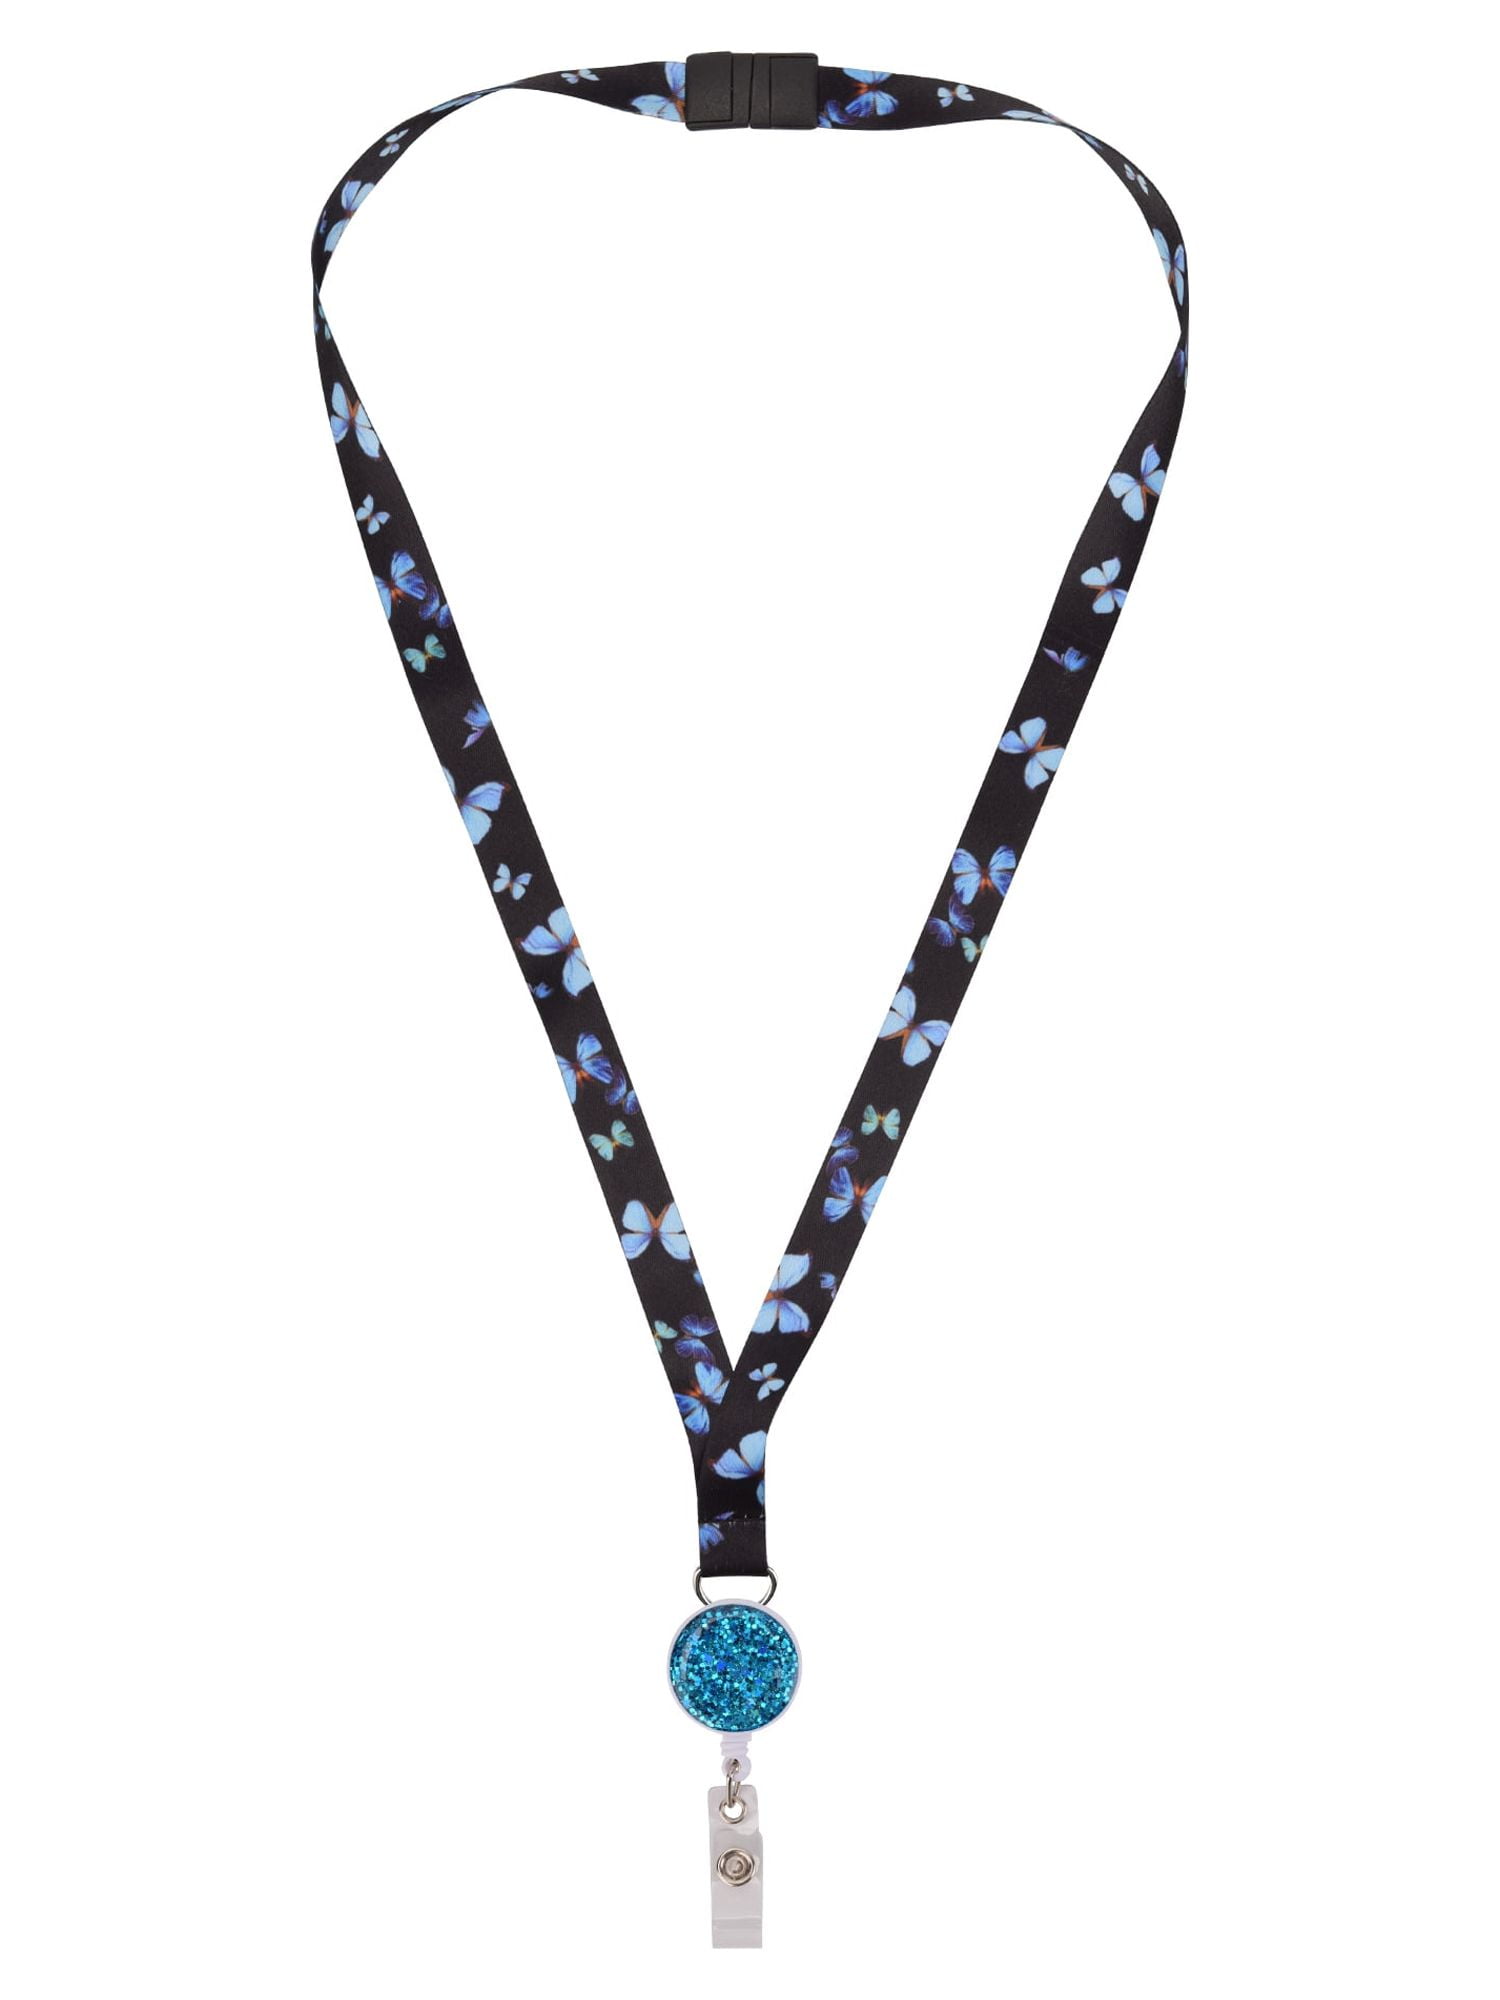 Solutions Adult Female Butterfly Print Lanyard with Blue Glitter